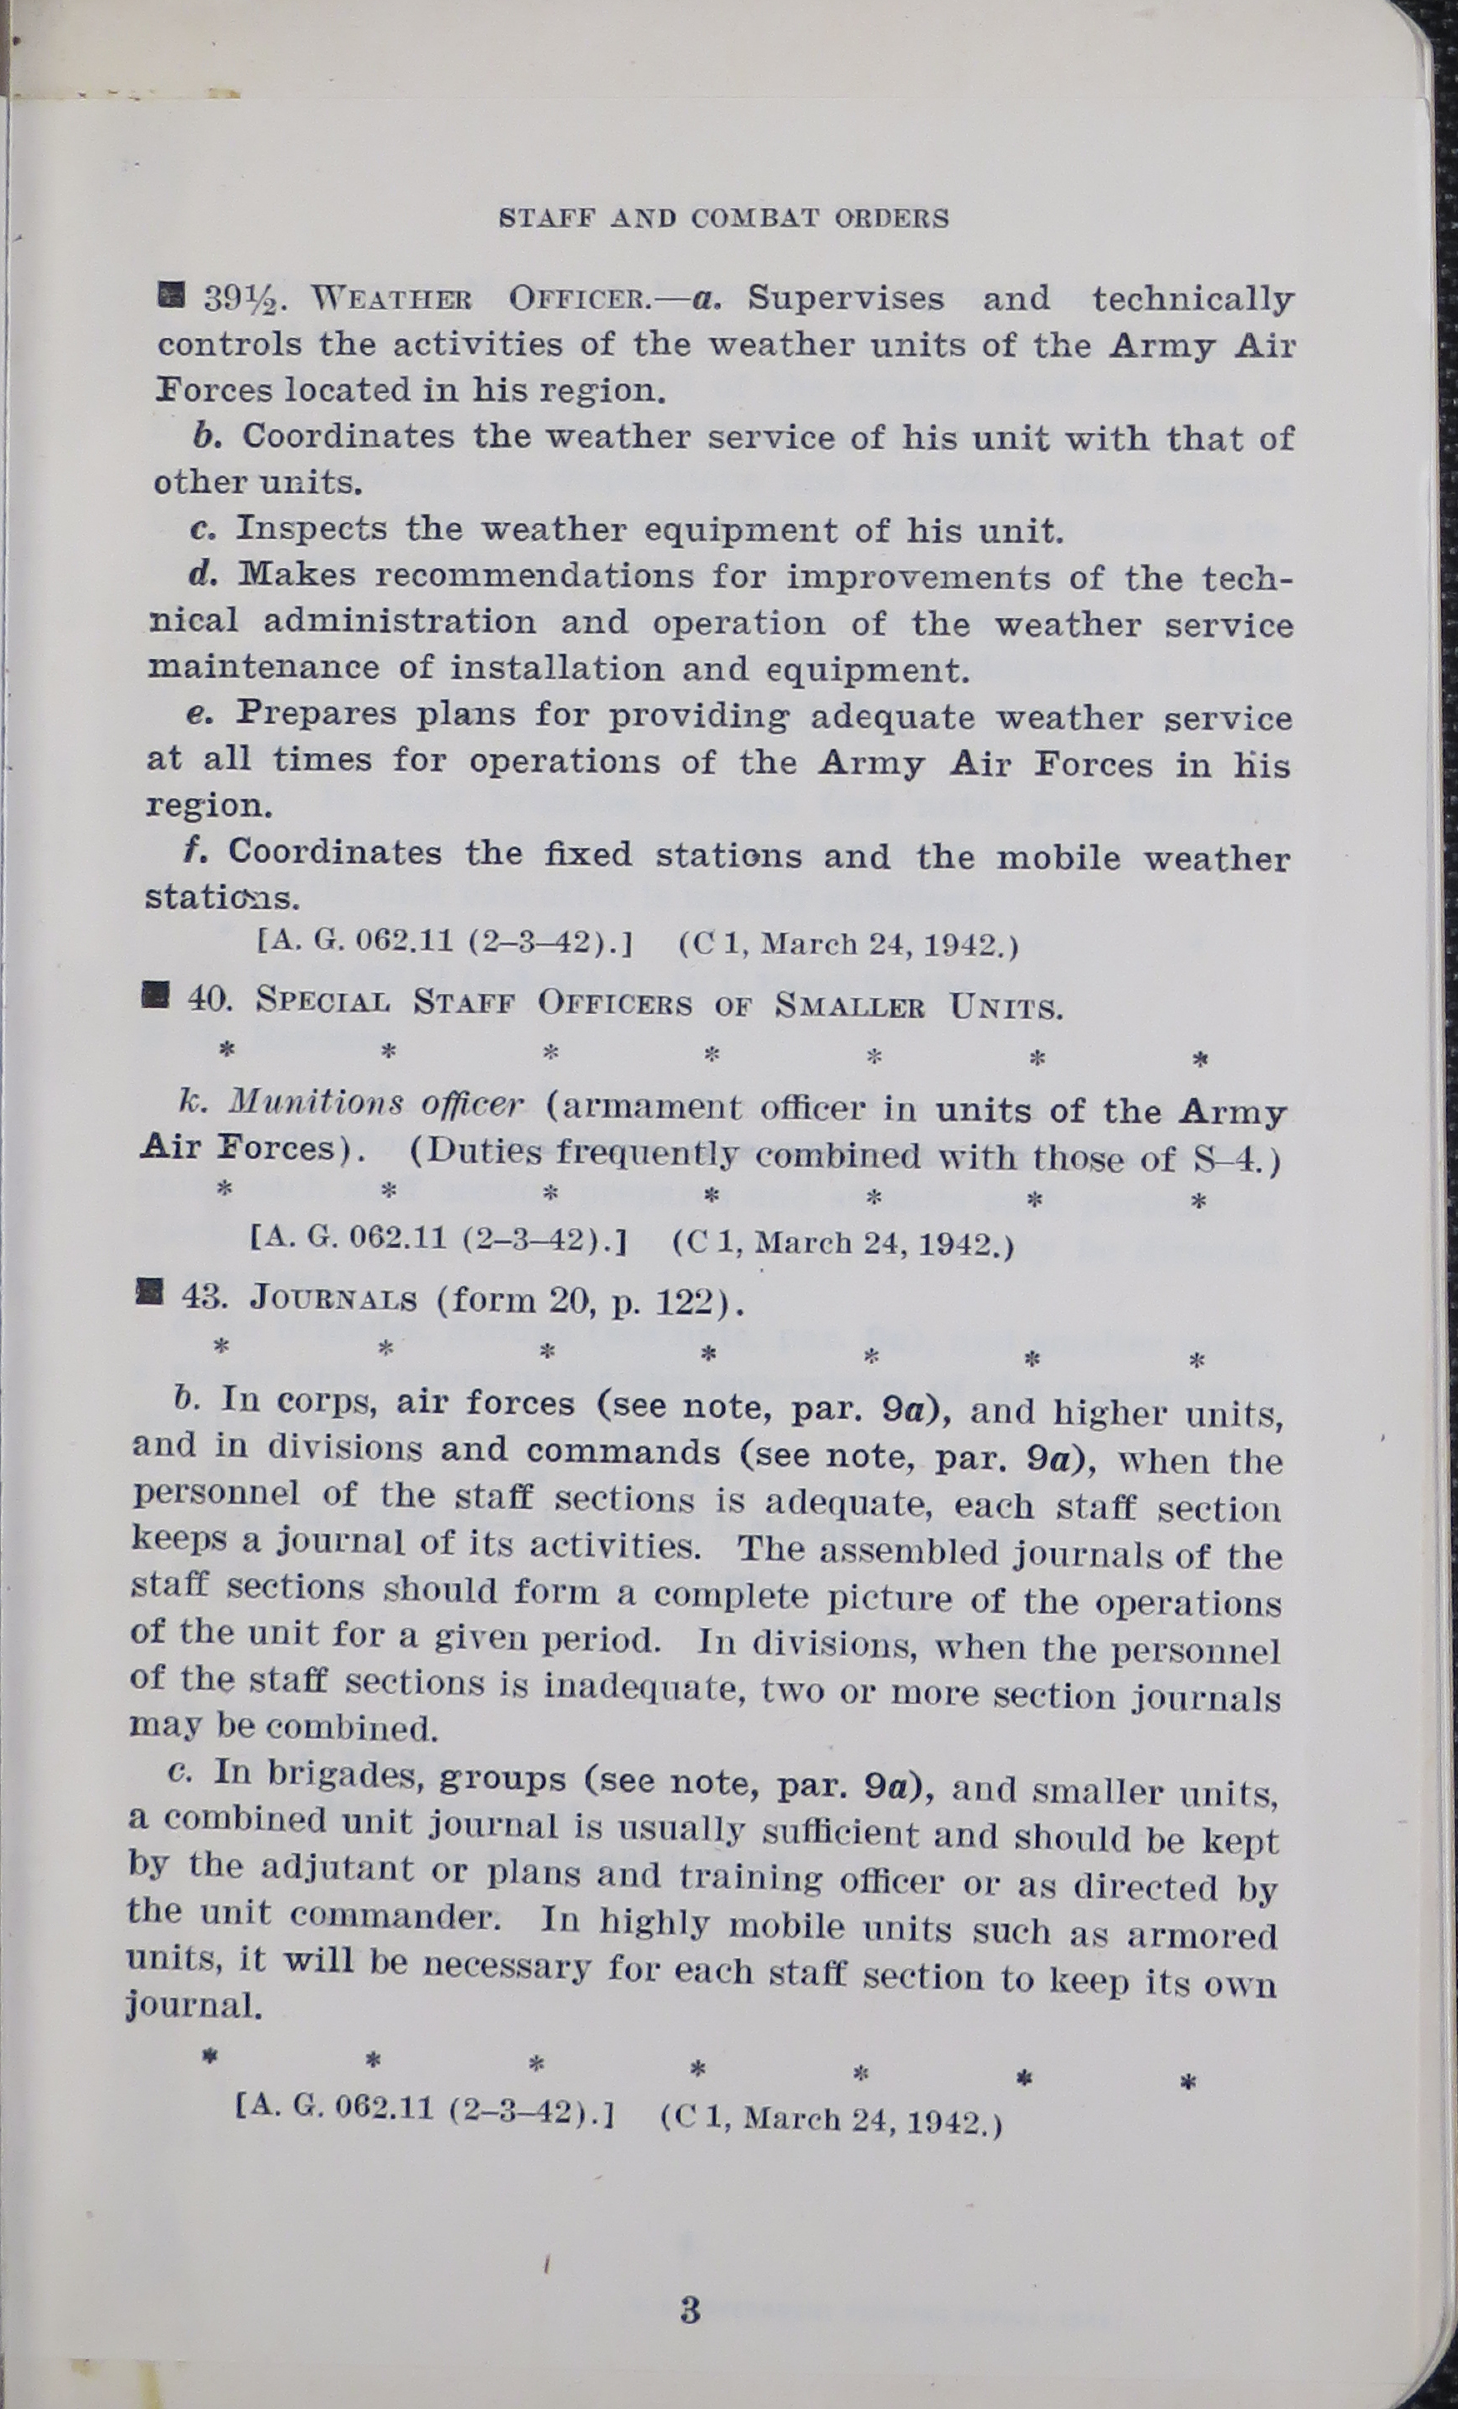 Sample page 7 from AirCorps Library document: Staff Officers' Field Manual: The Staff and Combat Orders